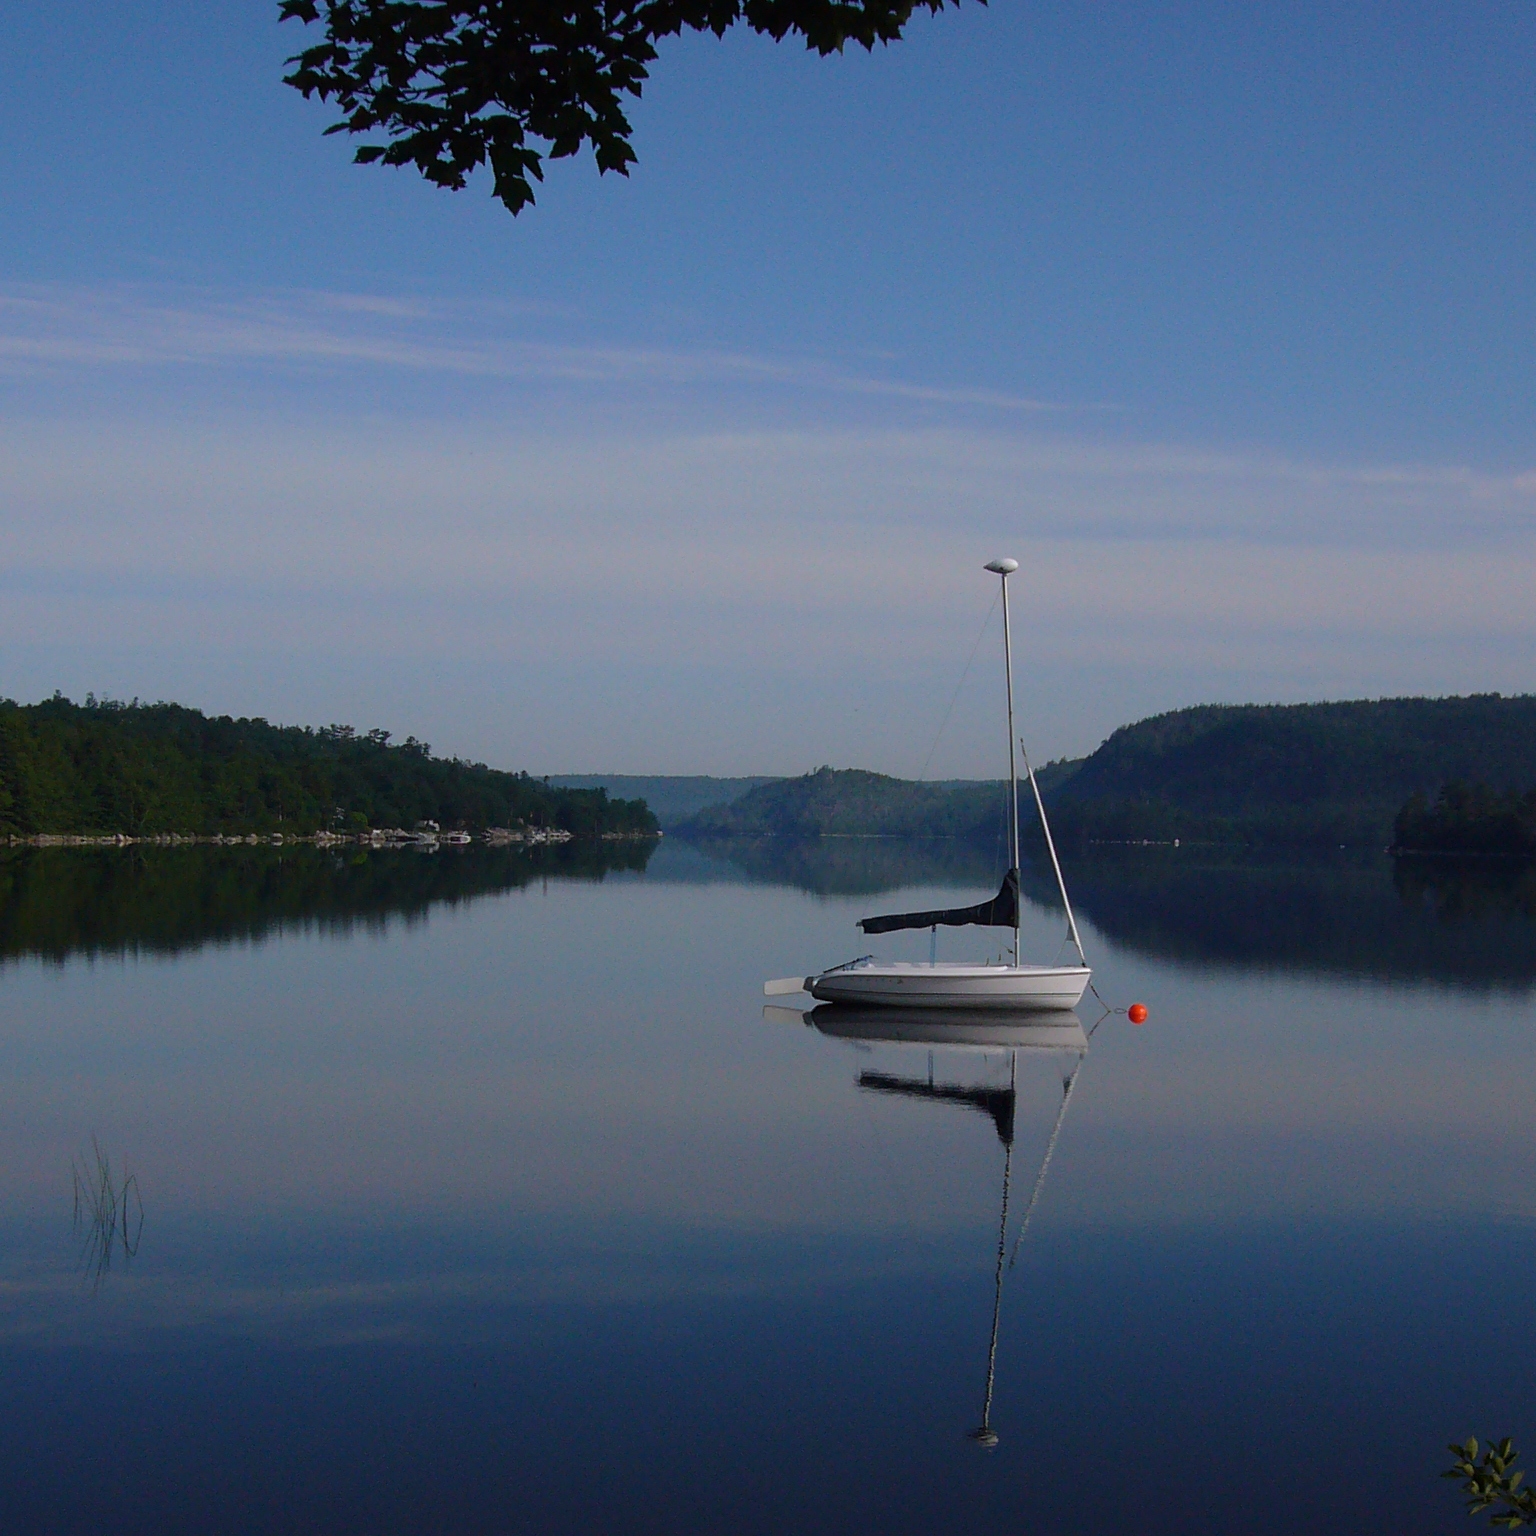 File:Sailboat on placid water.JPG - Wikimedia Commons